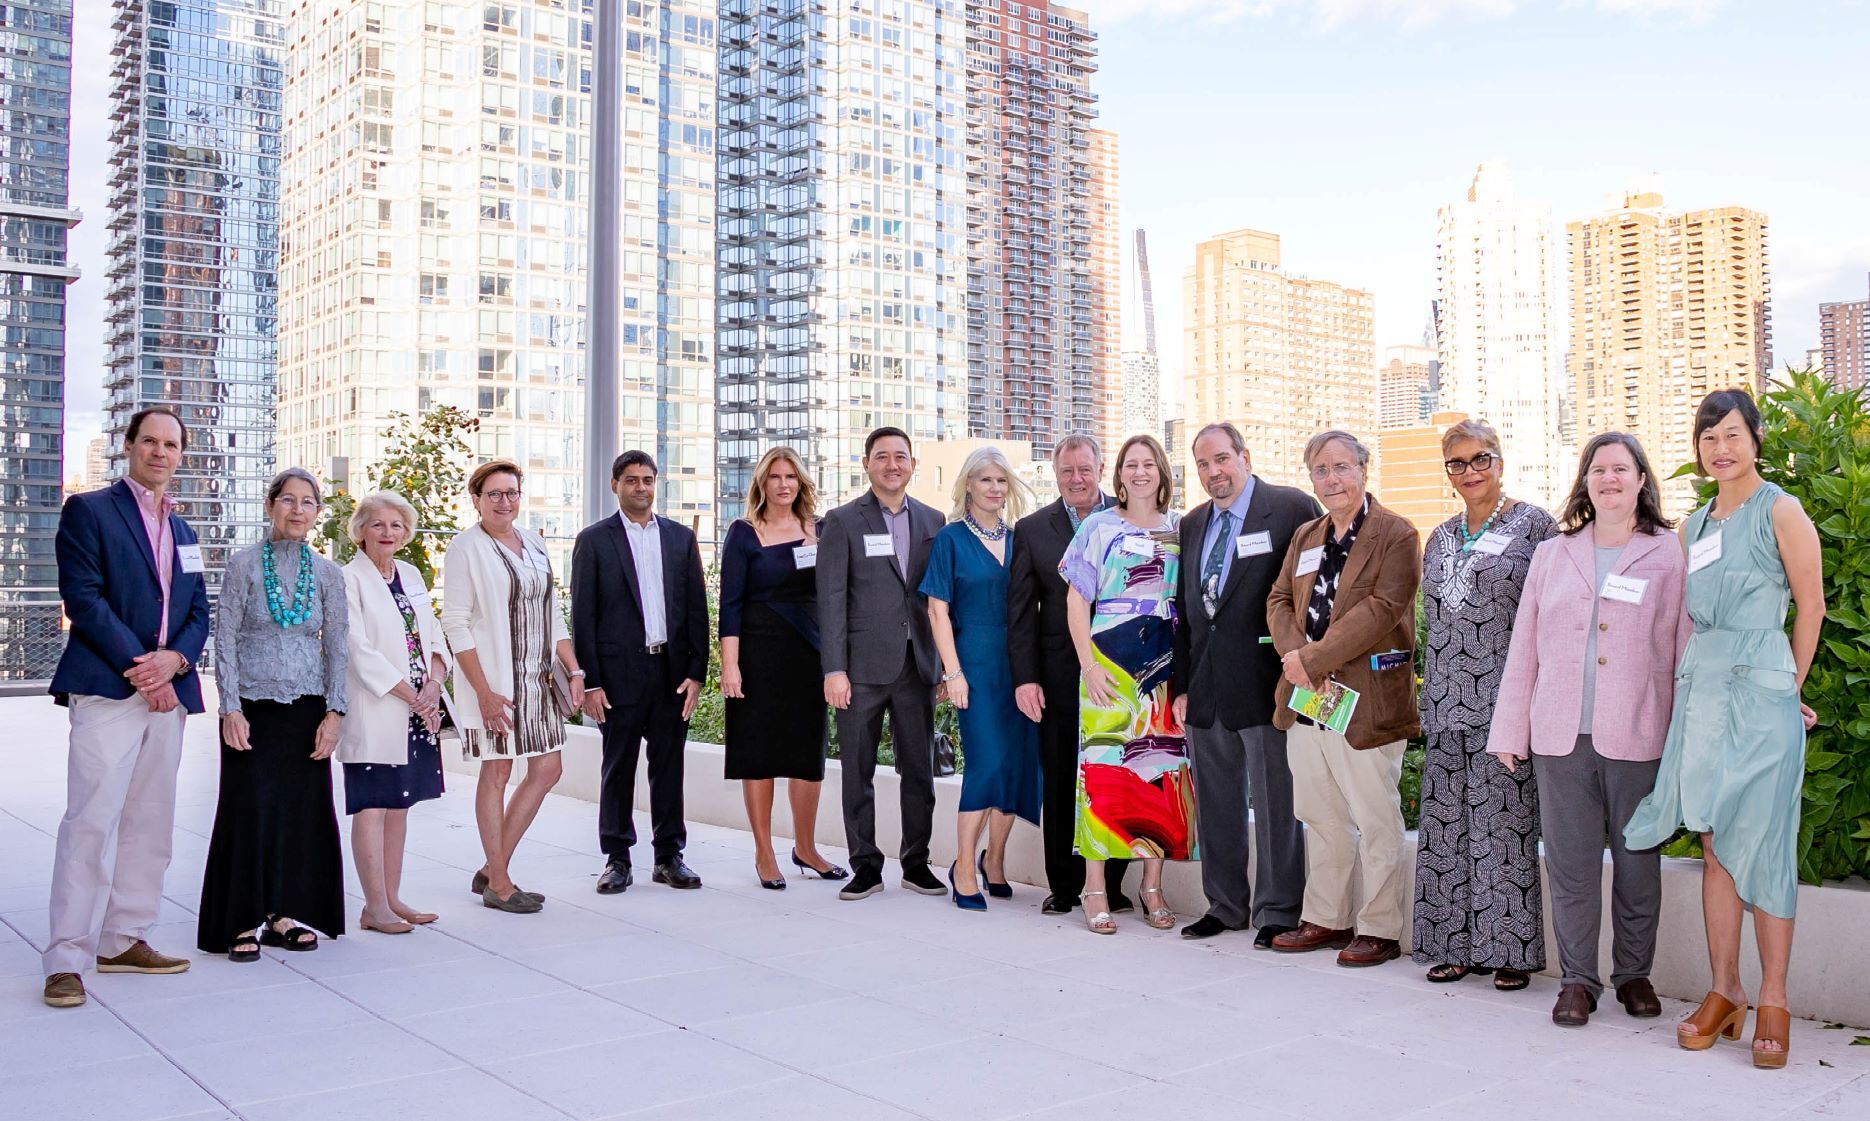 NYC Audubon leadership gathers at the 2022 Fall Roost, atop the Javits Center. Photo: Cyrus Gonzeles